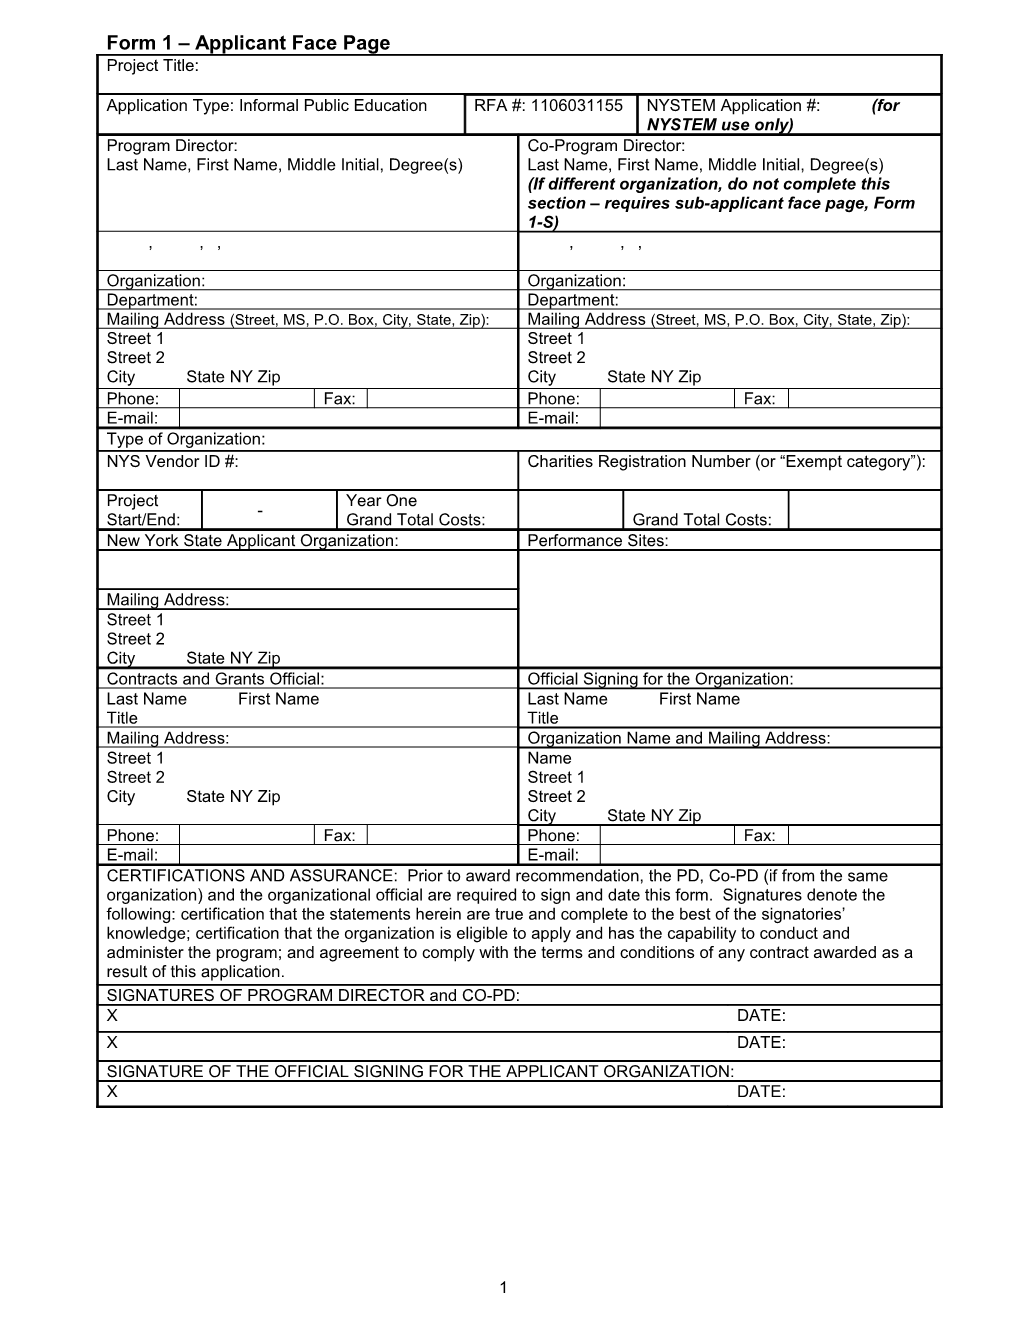 Form 1 Applicant Face Page